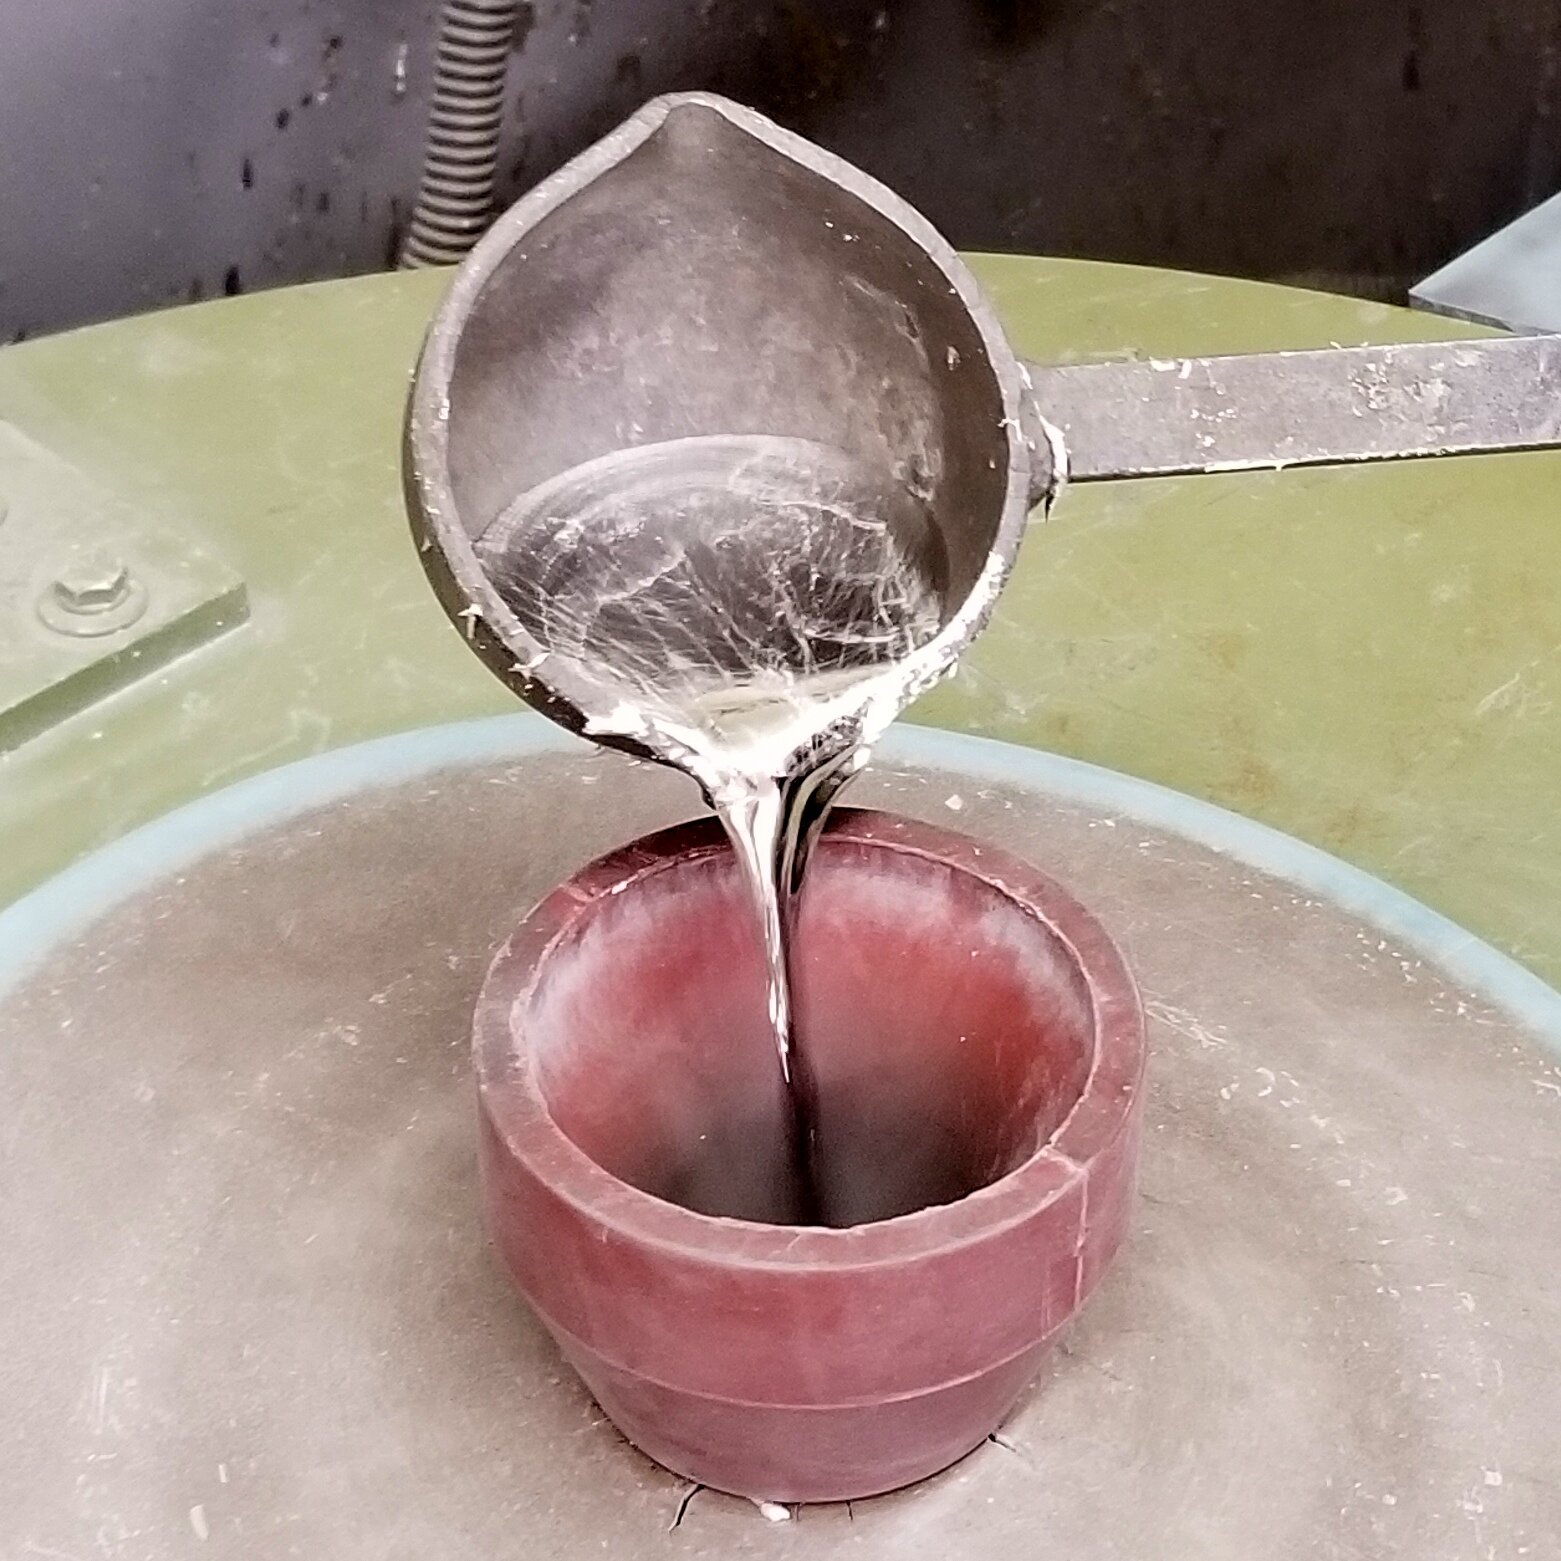 Pouring molten pewter